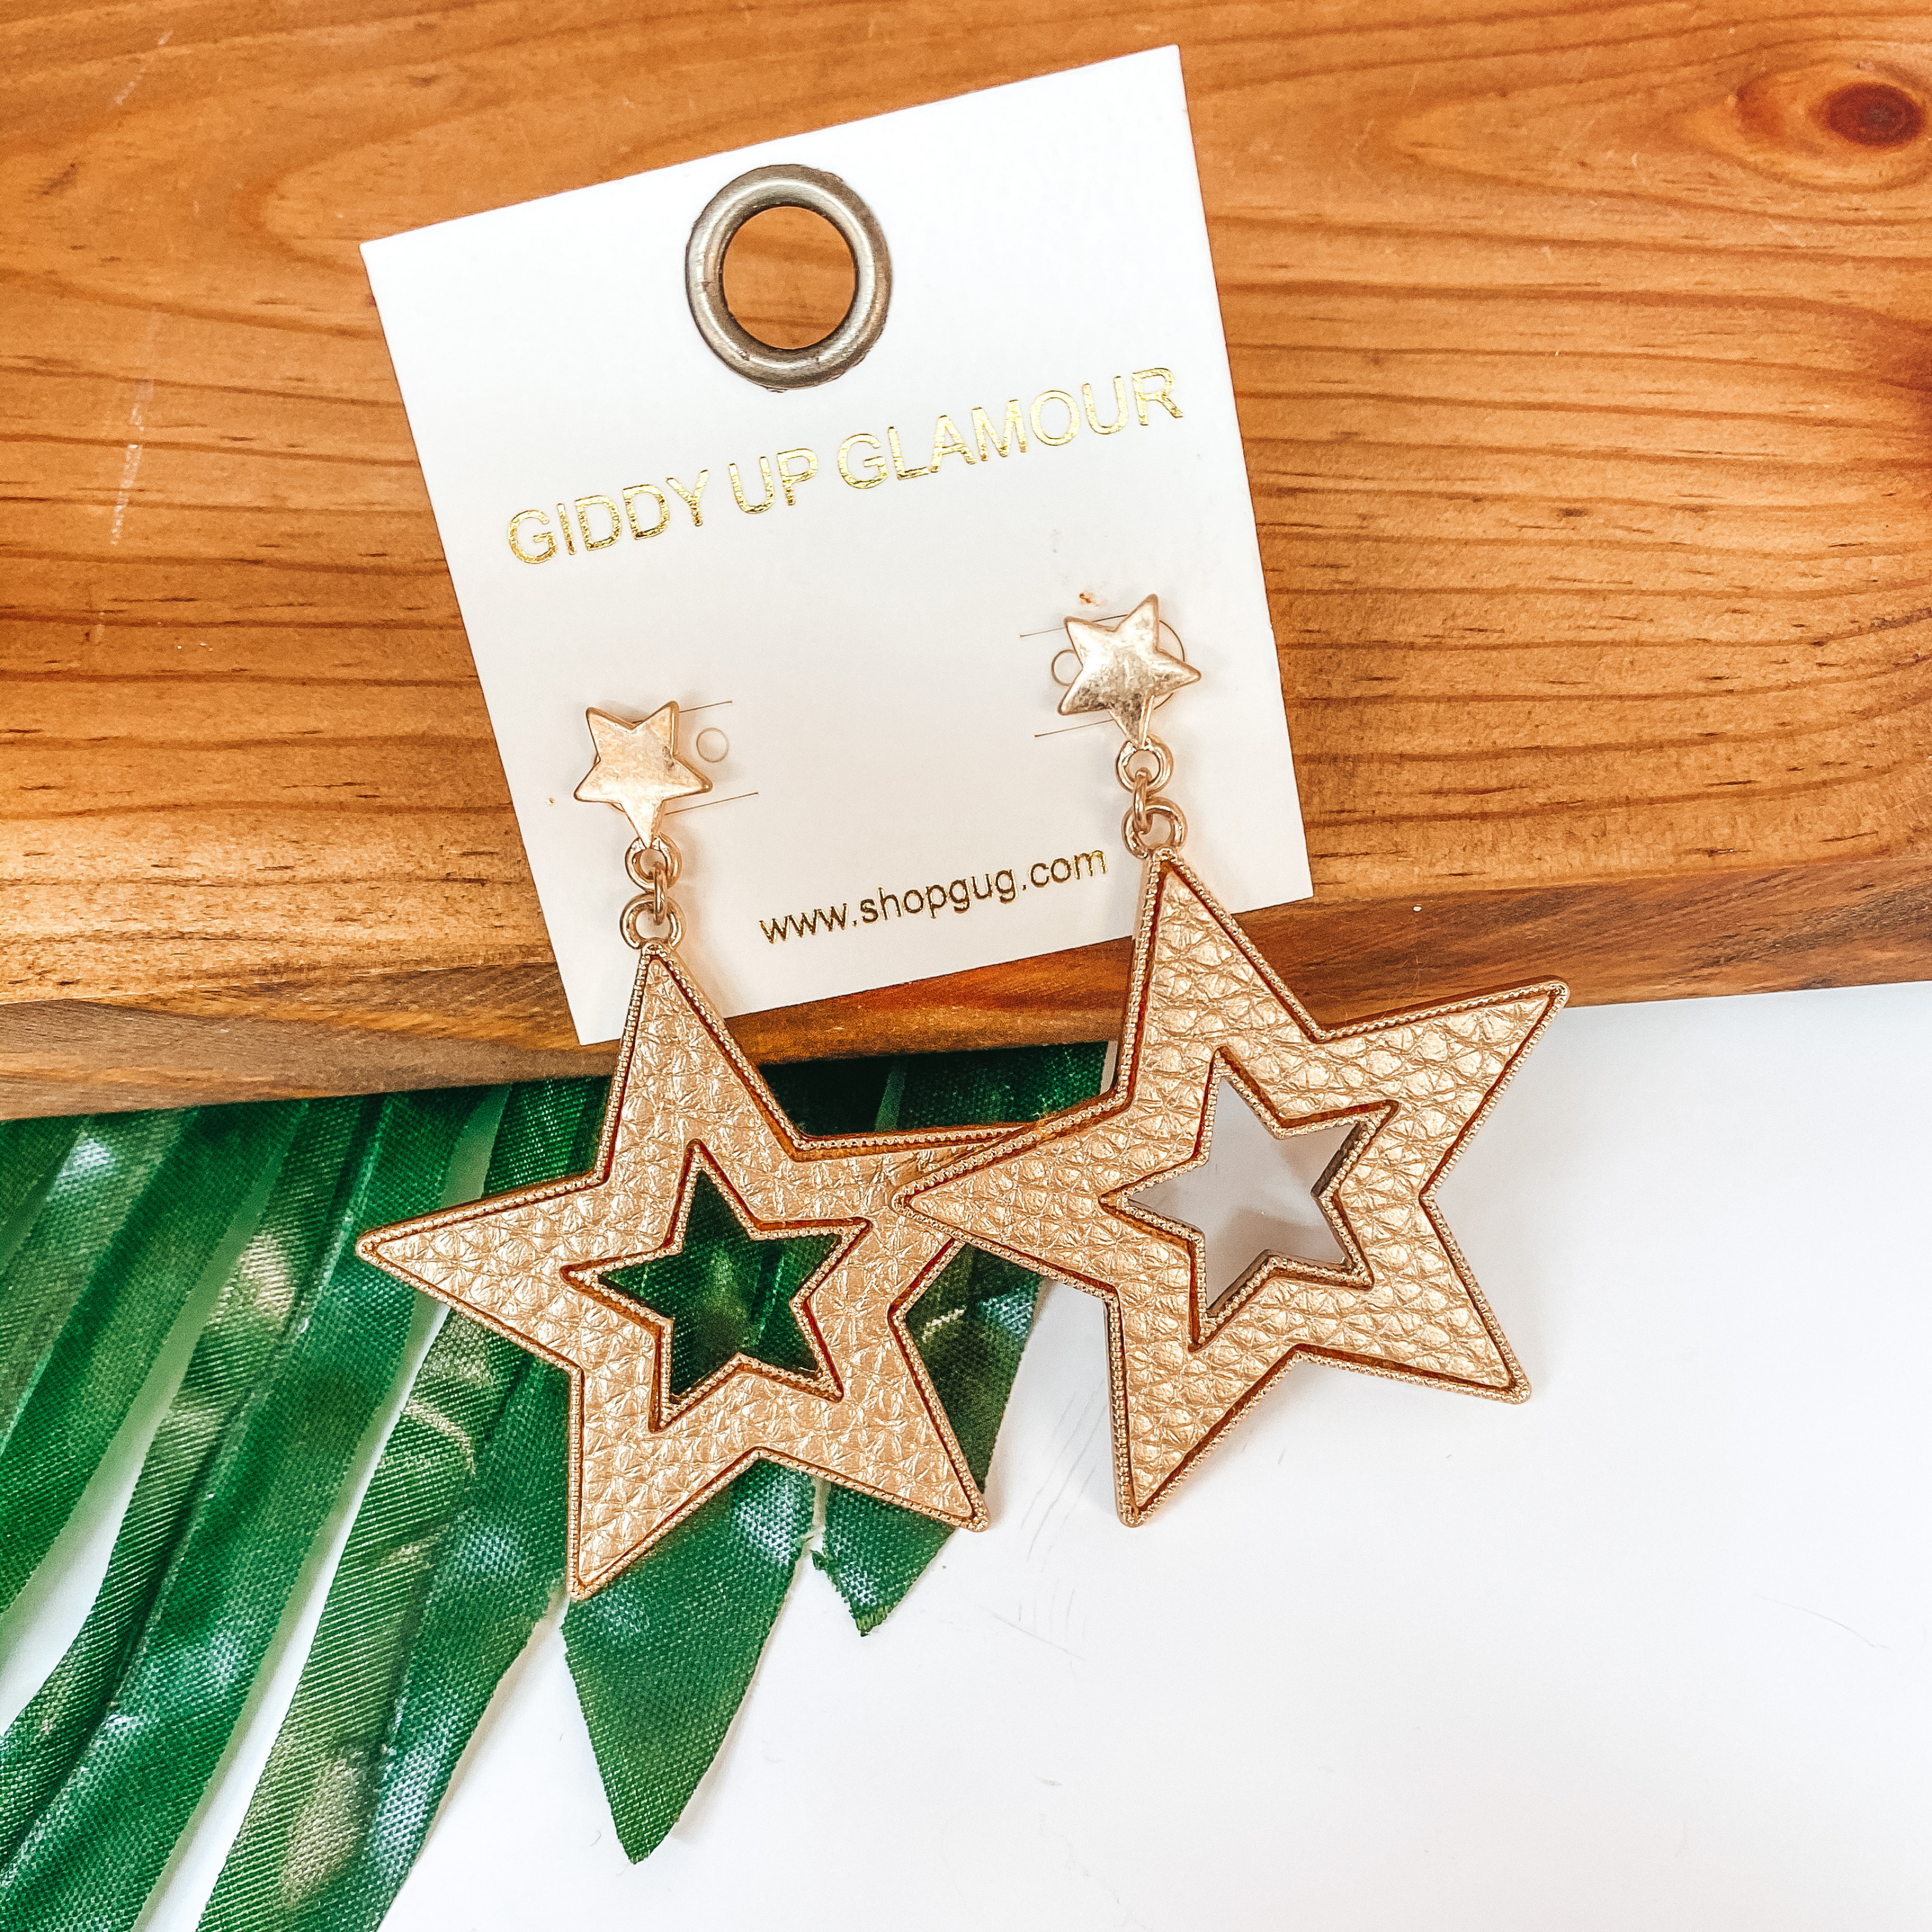 She's a Star Gold Post Dangle Earrings with Leather Star in Gold - Giddy Up Glamour Boutique